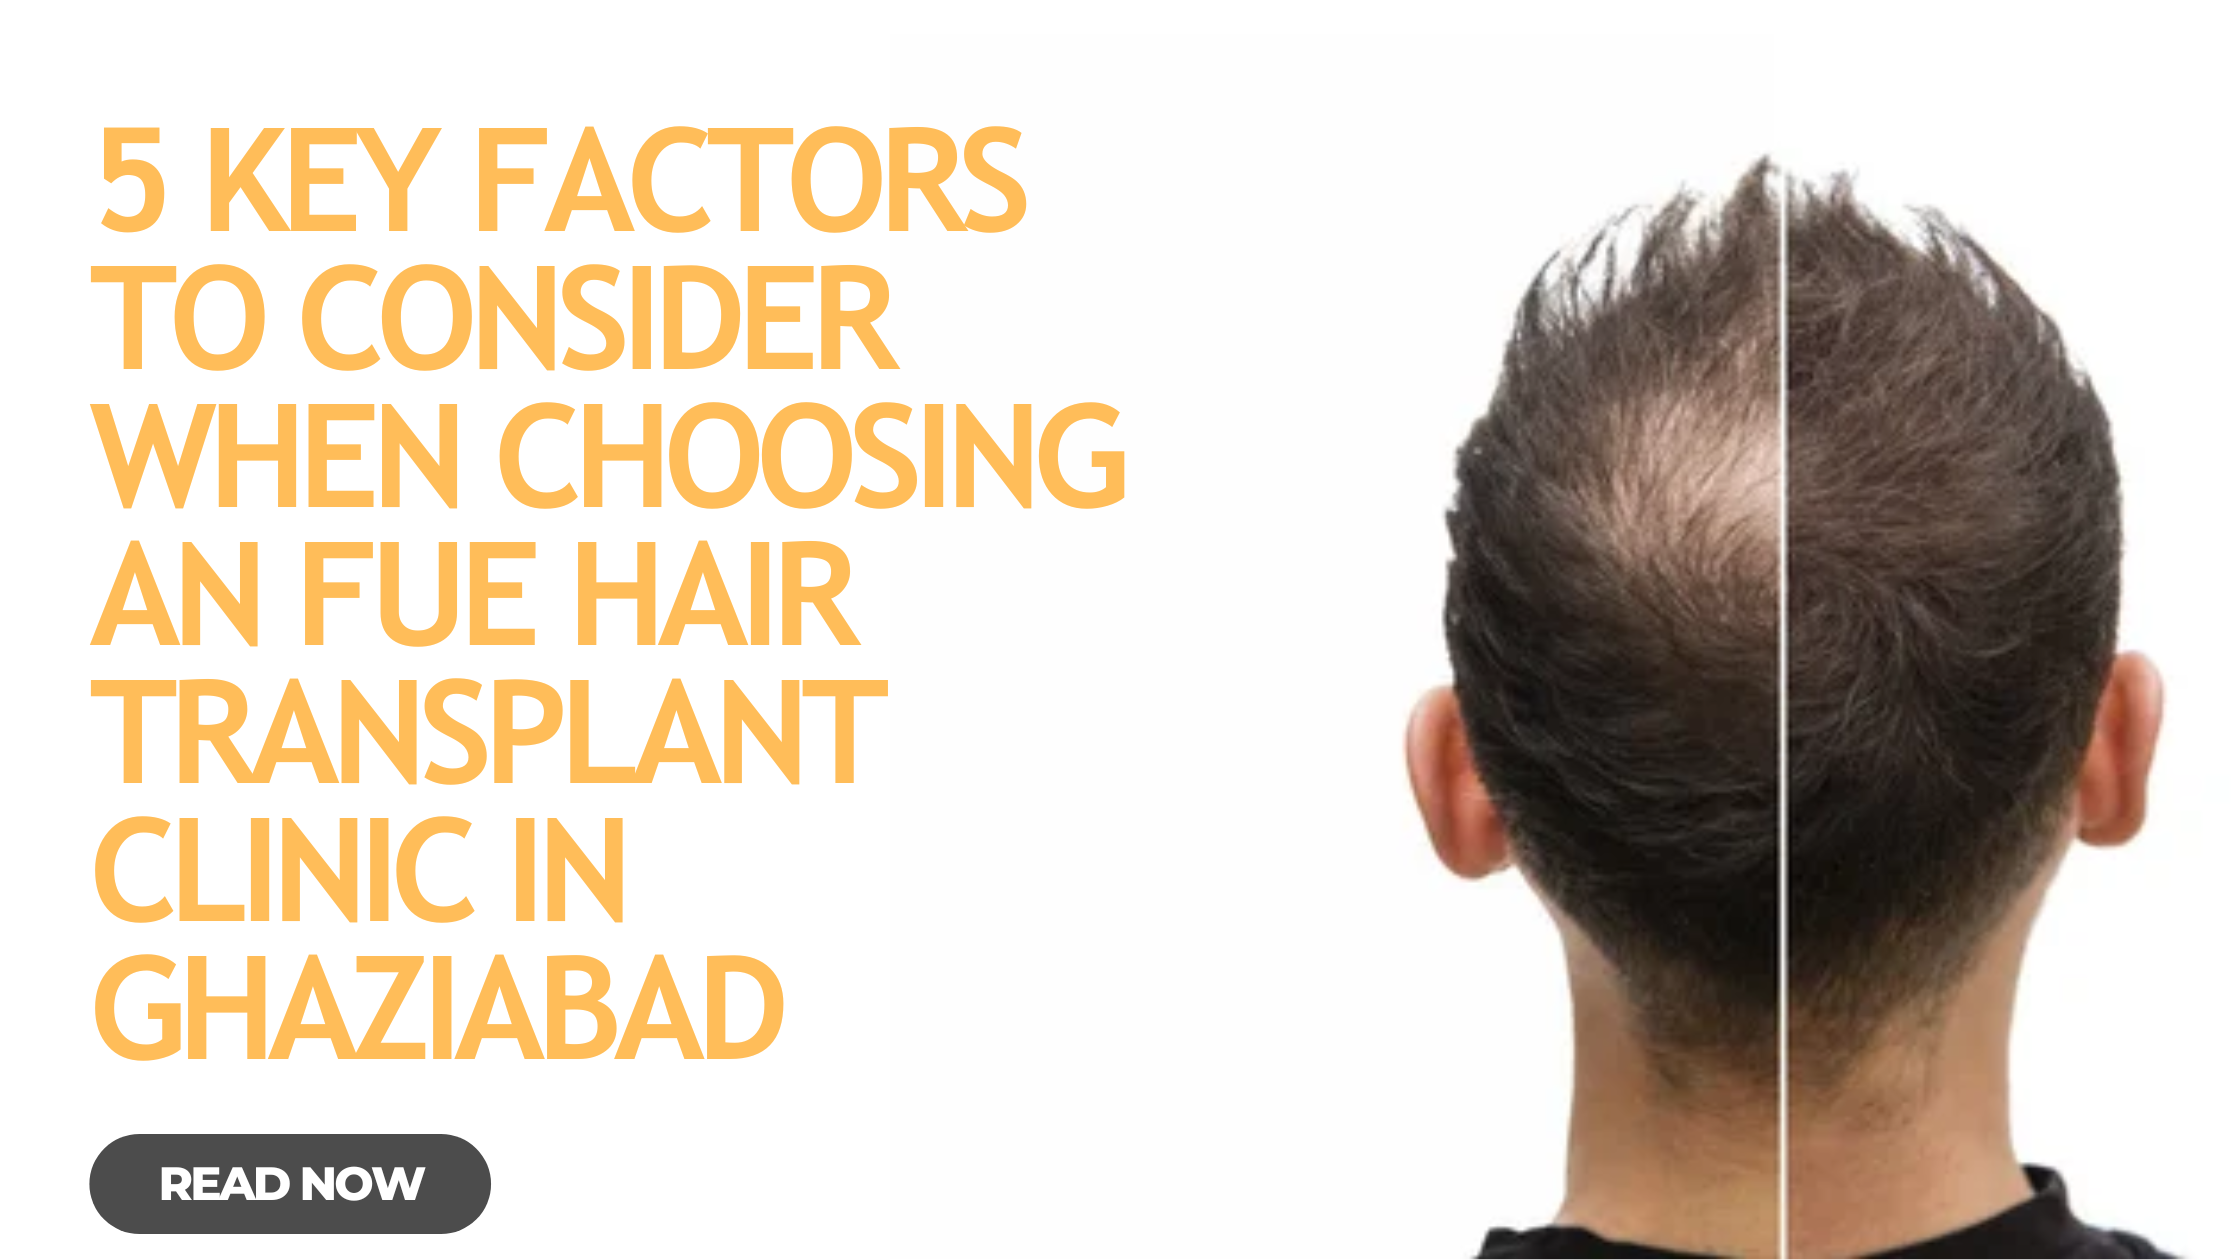 5 Key Factors to Consider When Choosing an FUE Hair Transplant Clinic in Ghaziabad